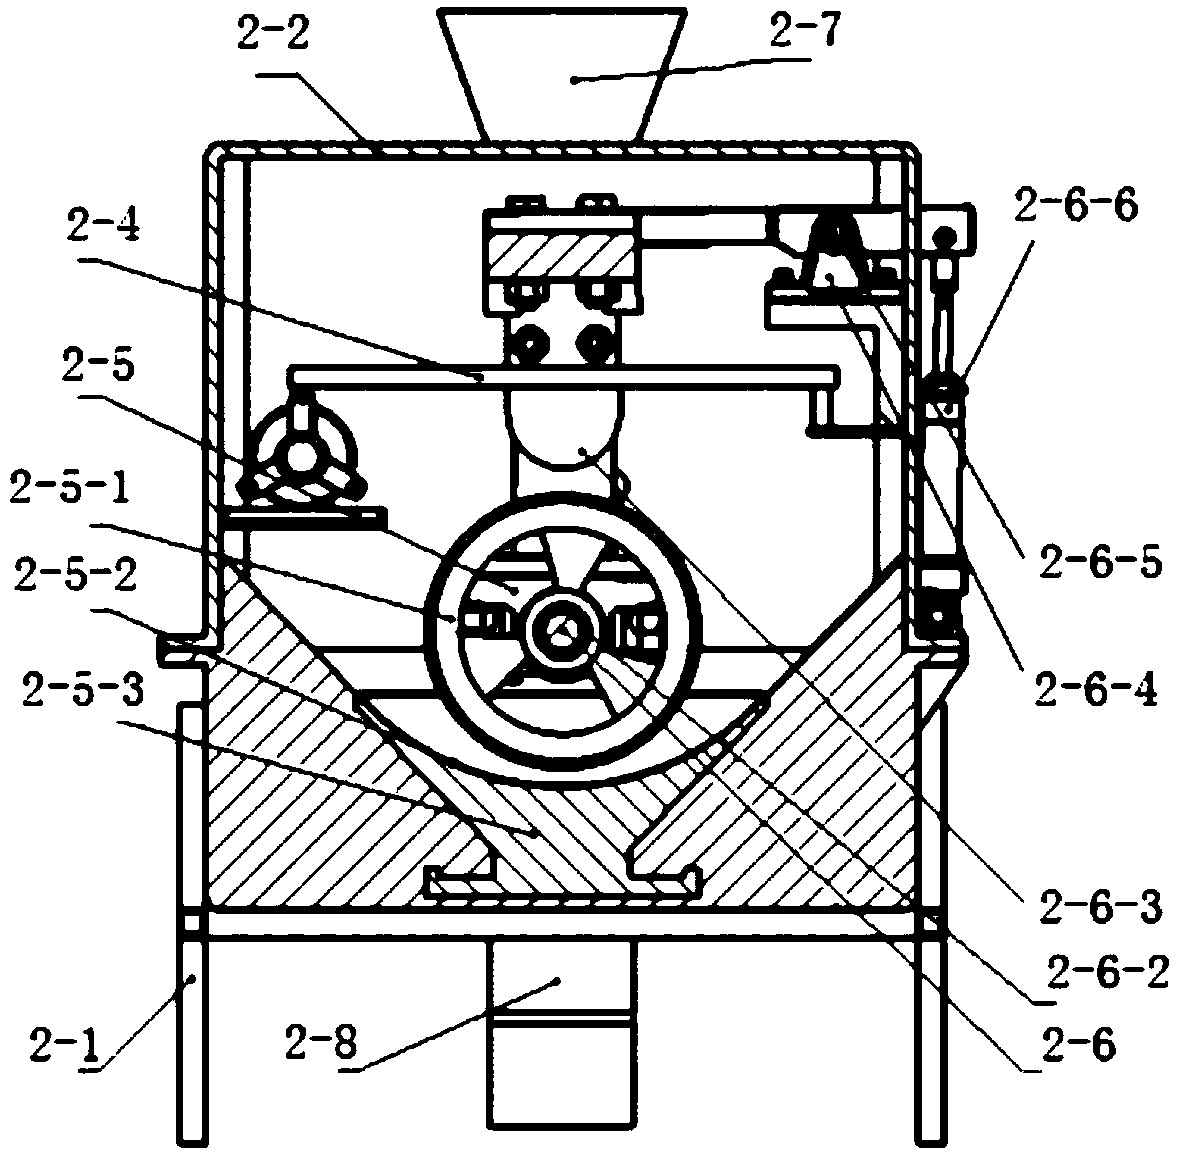 Drum-type hard seed dormancy breaking production system